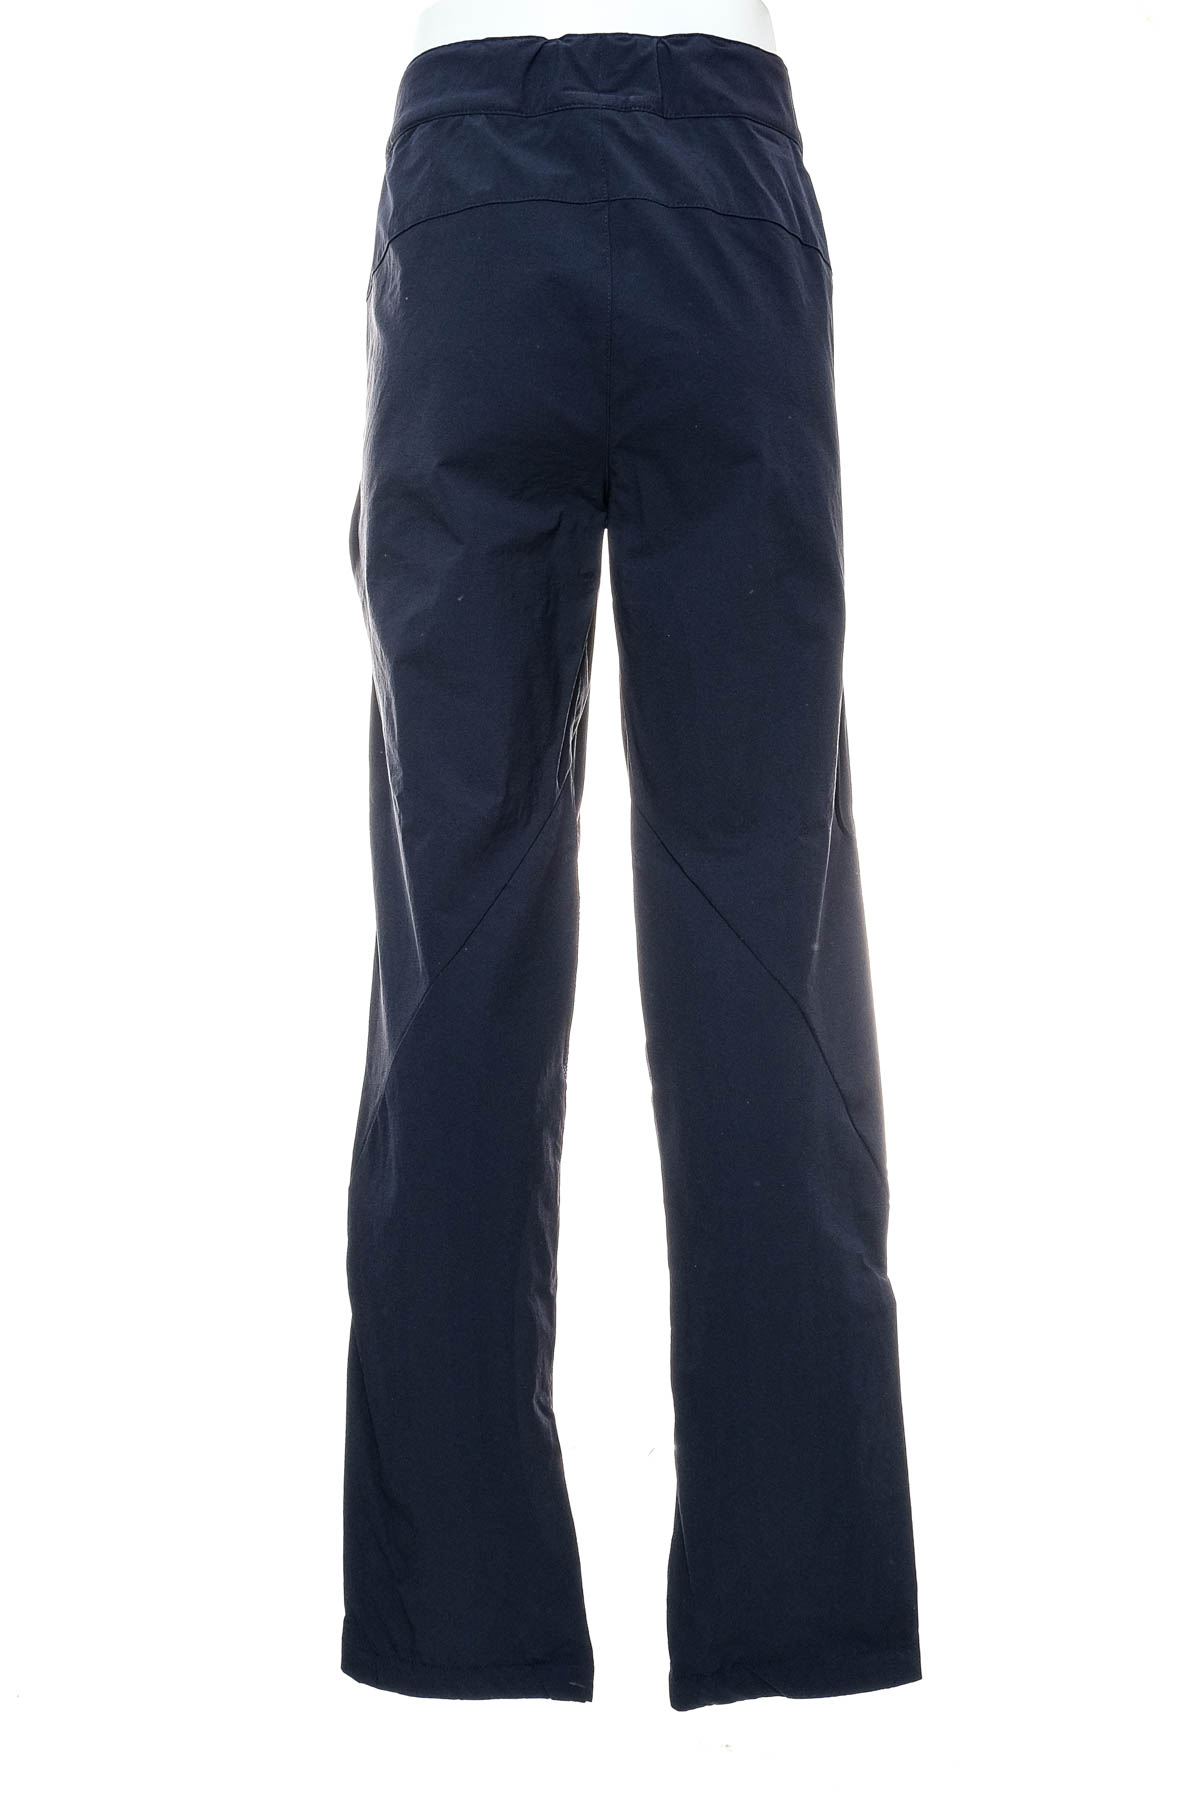 Men's trousers - Active Touch - 1